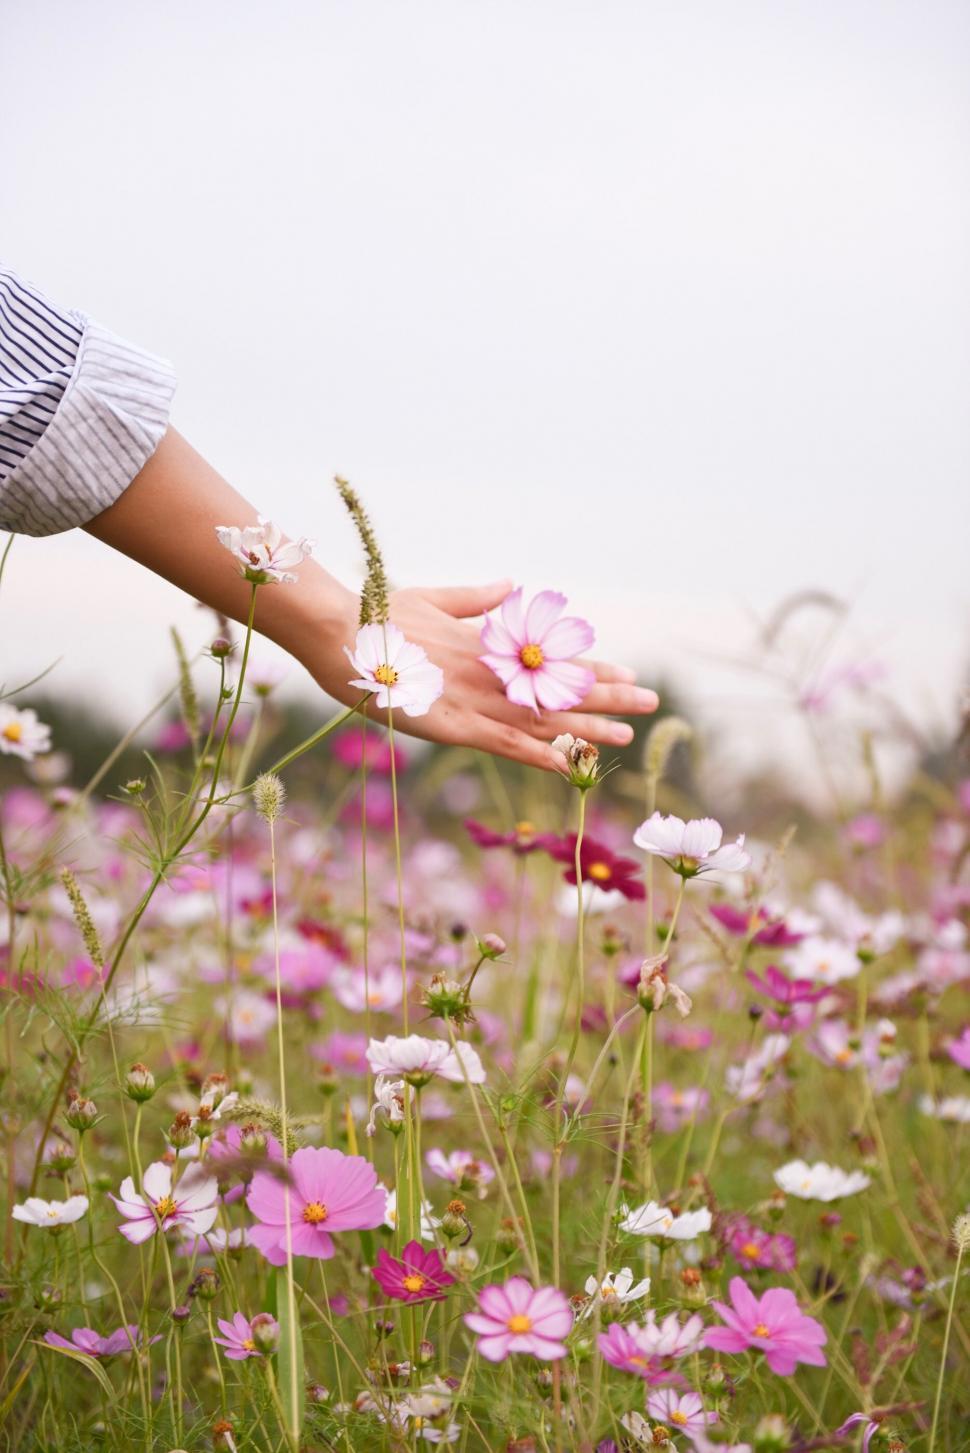 Free Image of Person Reaching for Flower in Field 